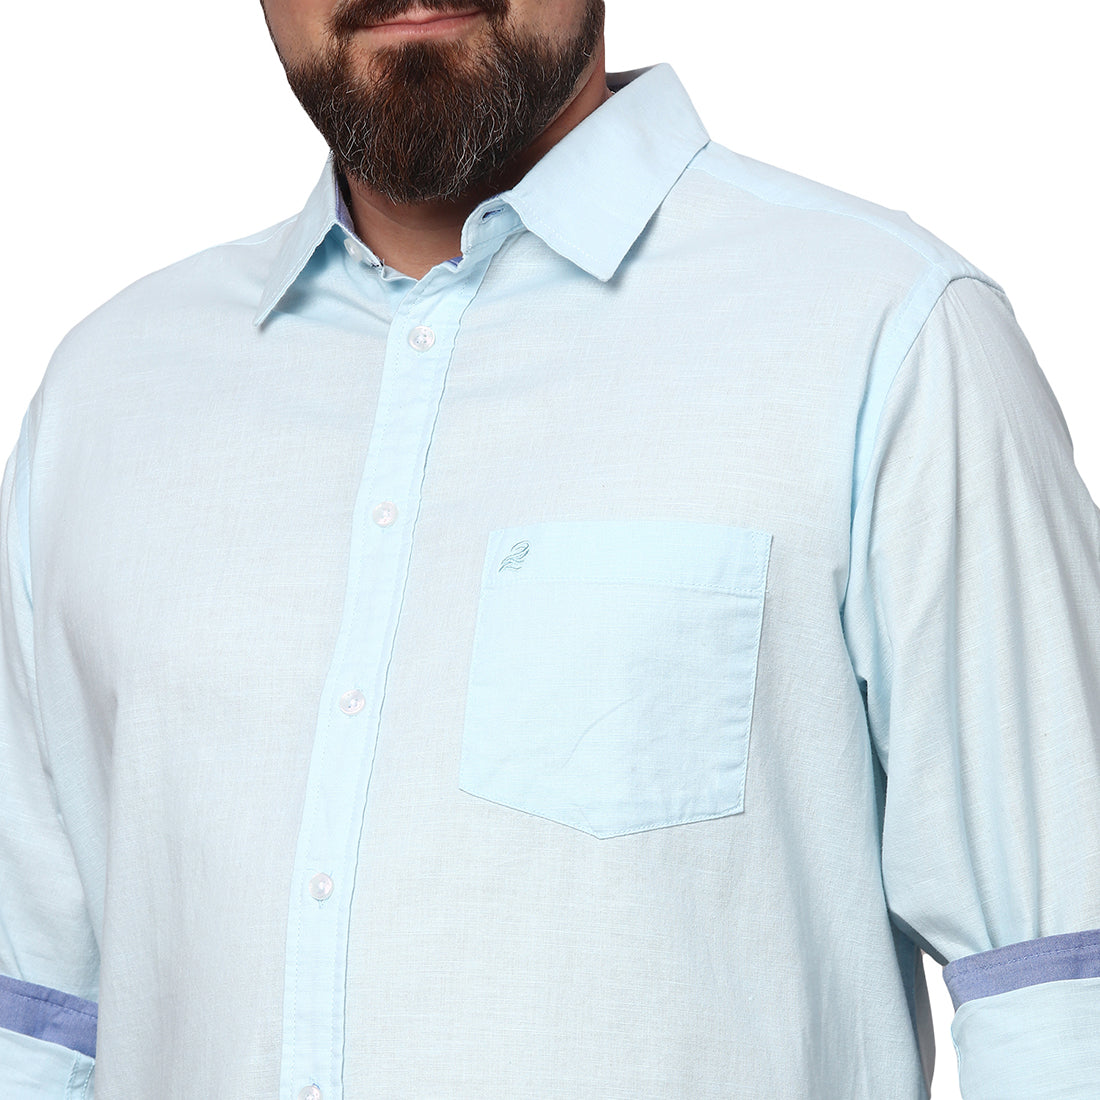 Big & Bold Solid Sky Blue Full Sleeves Slim Fit Casual Shirts (Plus Size) - Double Two